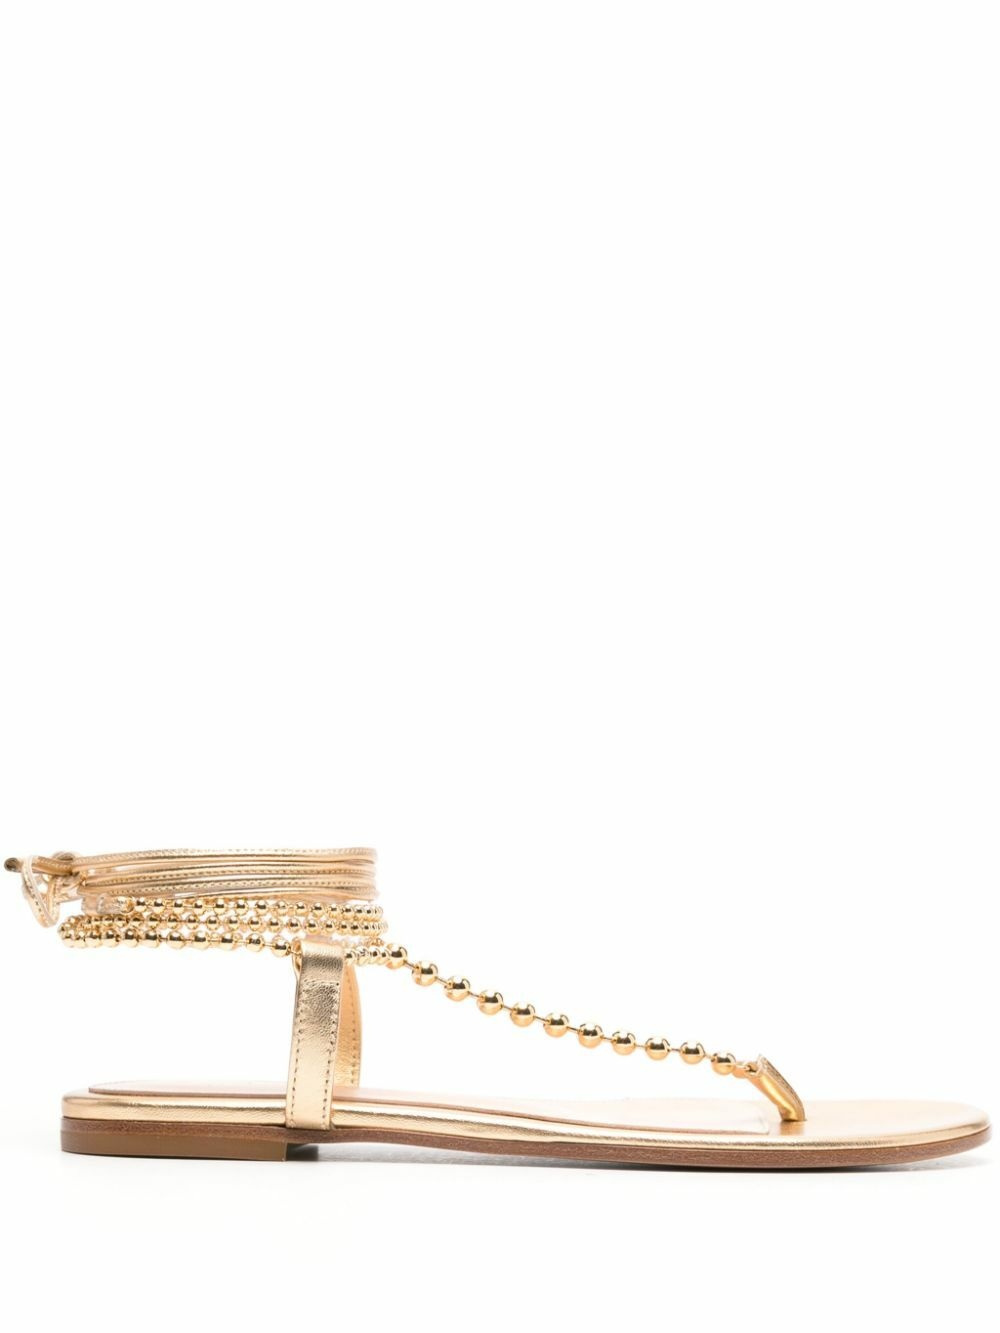 Photo: GIANVITO ROSSI - Soleil Leather Thong Sandals